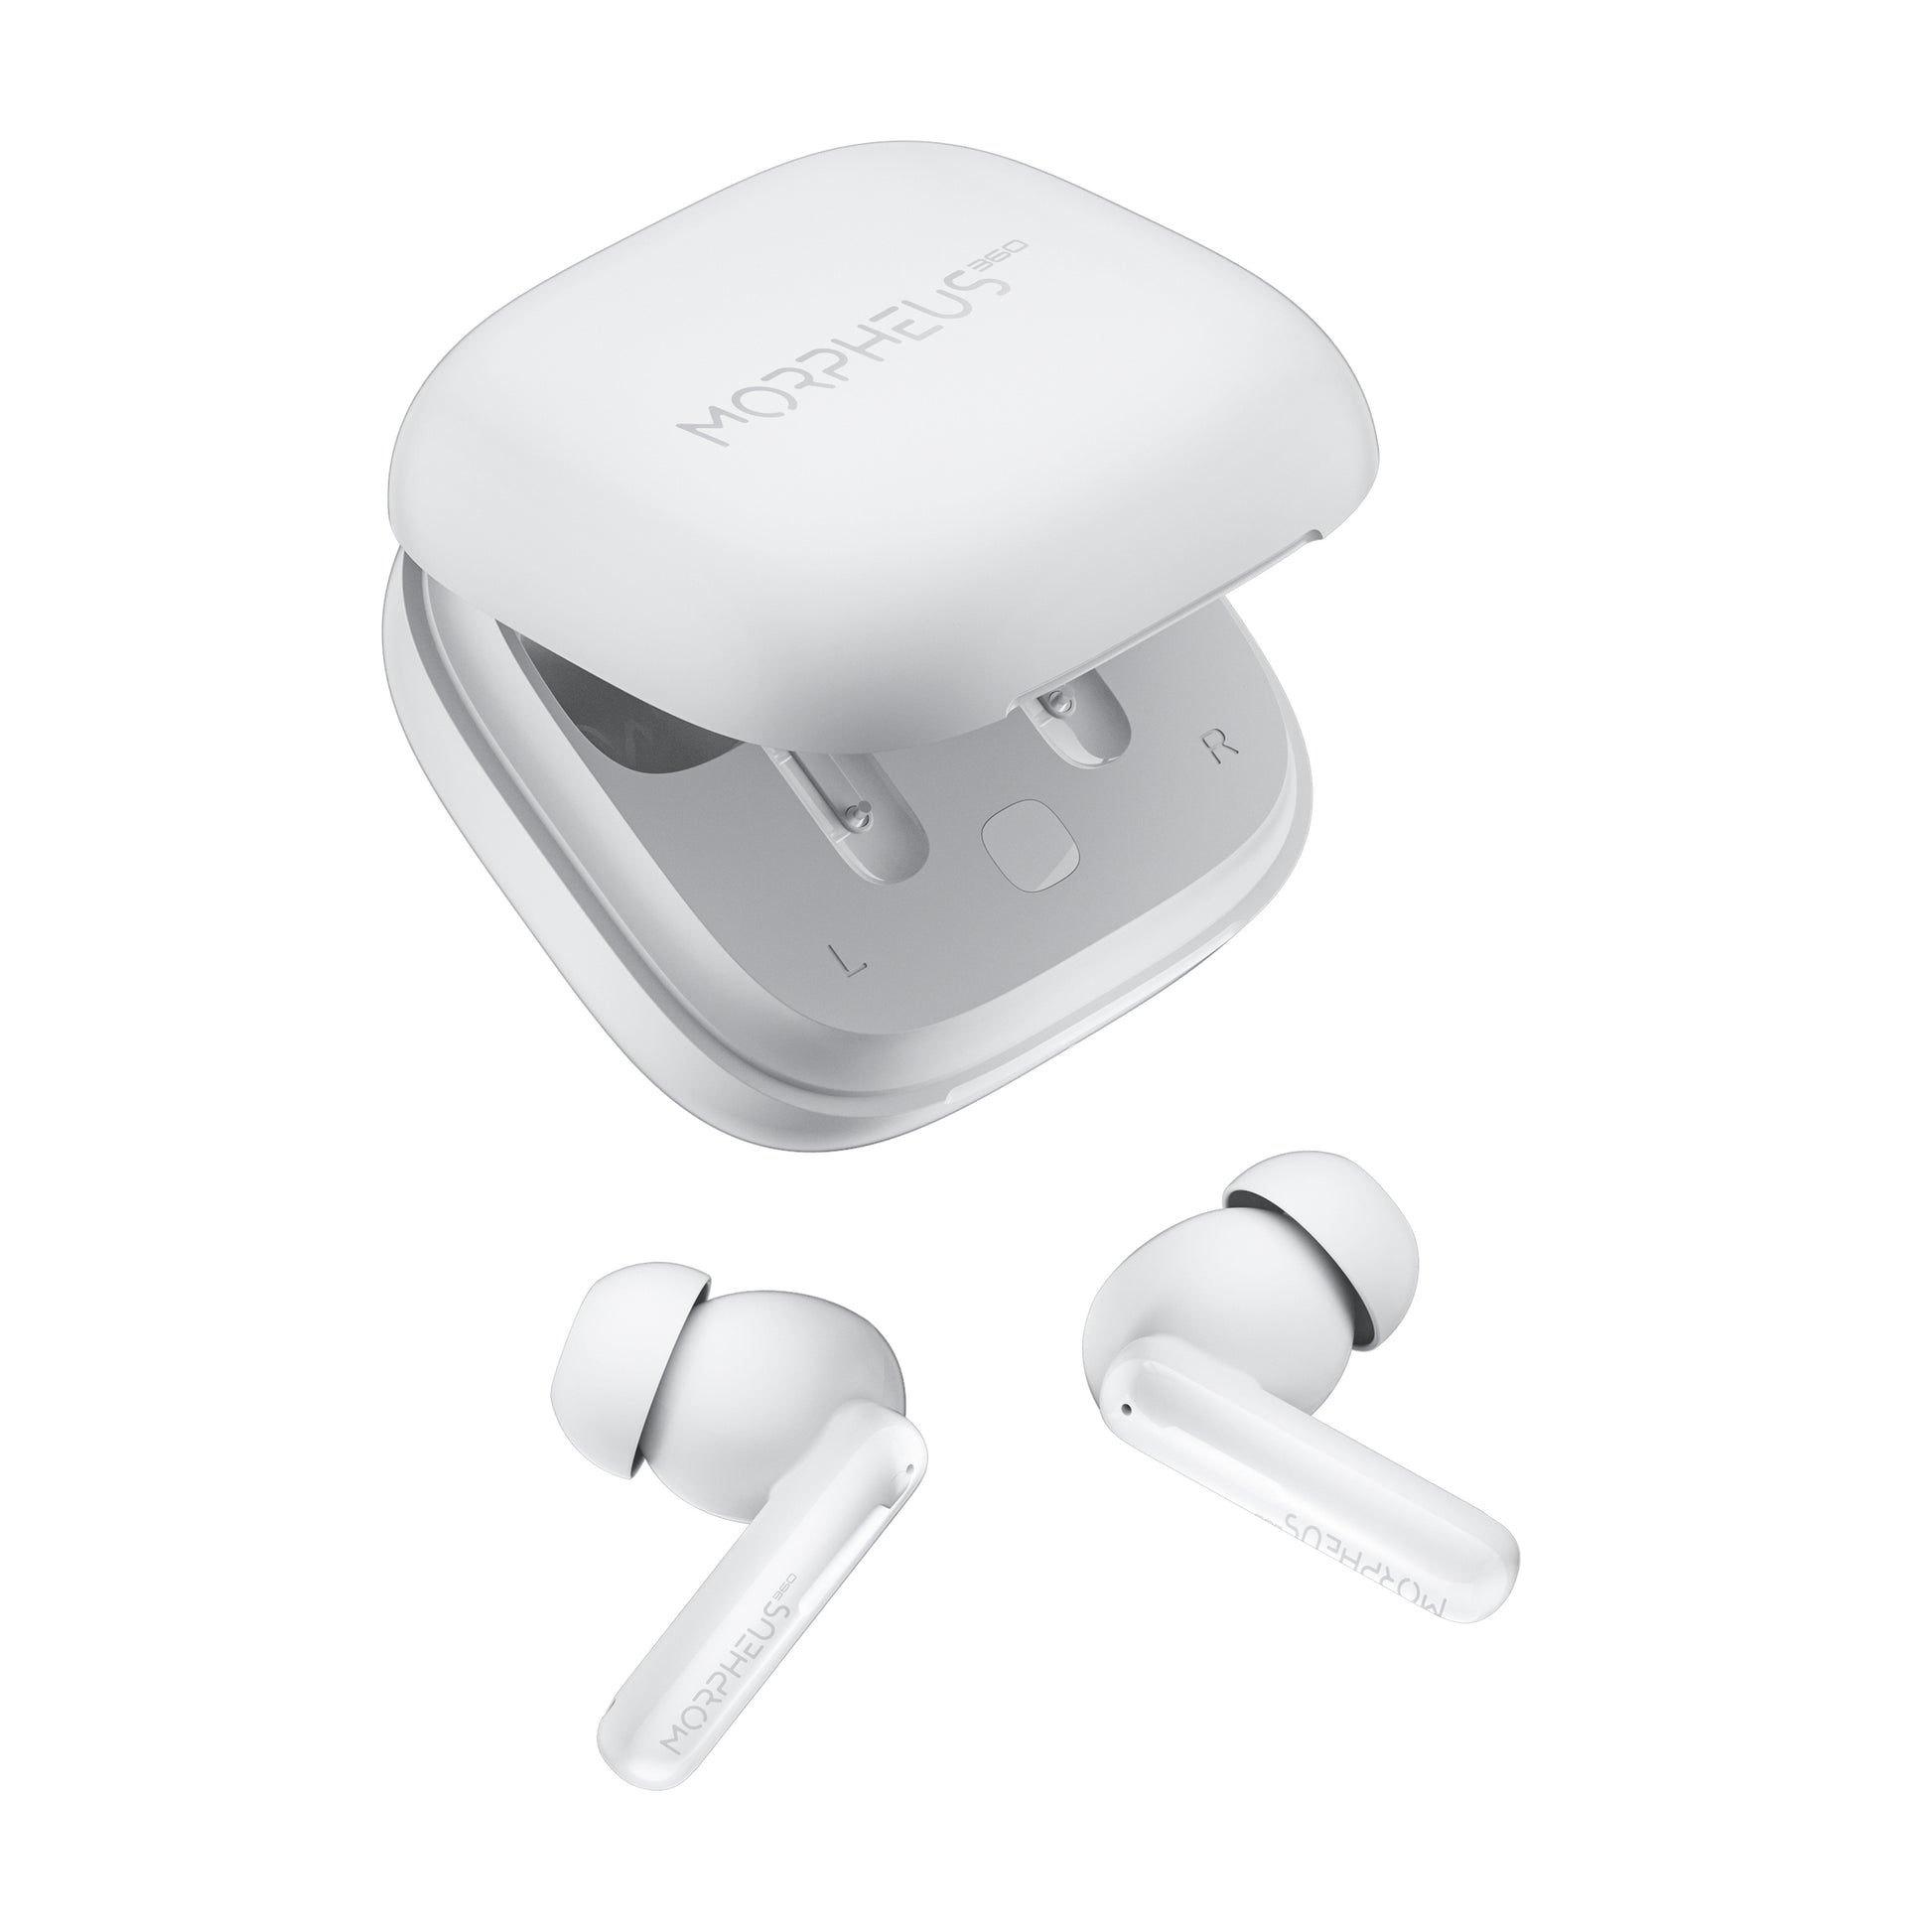  Morpheus 360 Pulse HD Wireless Earbuds, Hybrid Noise  Cancelling, Wireless Microphone, Bluetooth 5.2 Wireless Ear Buds, One Touch  Media Control, Waterproof, Recharging Earbud Case - TW7800W, White : Home &  Kitchen